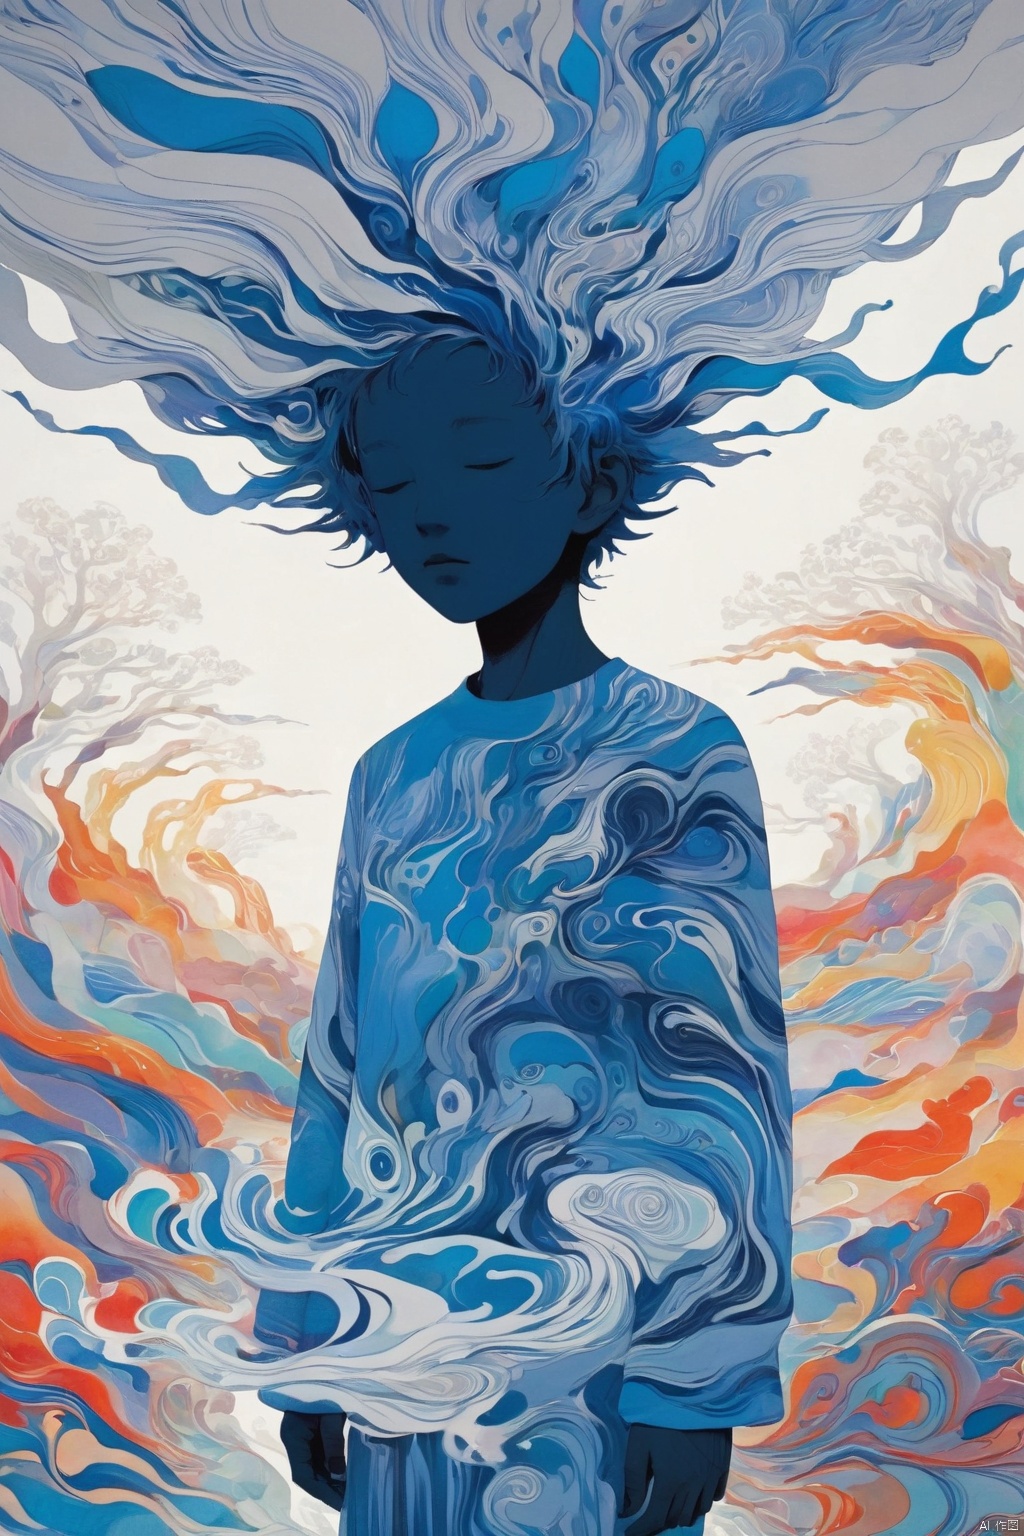 A boy silhouette with an aura of swirling colors, wandering on the edge of the abstract land of the dead,symbolizing the vastness and depth.white background, creating a surreal atmosphere, In his head is depicted as a surreal dreamscape filled with floating islands and ethereal creatures,with blowing patterns and dark hues. the colors are vibrant and fluid, capturing movement and energy in a dreamlike way, dark white color theme, digital art style, abstract art background, highly detailed.This artwork conveys a sense of wonder about life and death, longitudinal section